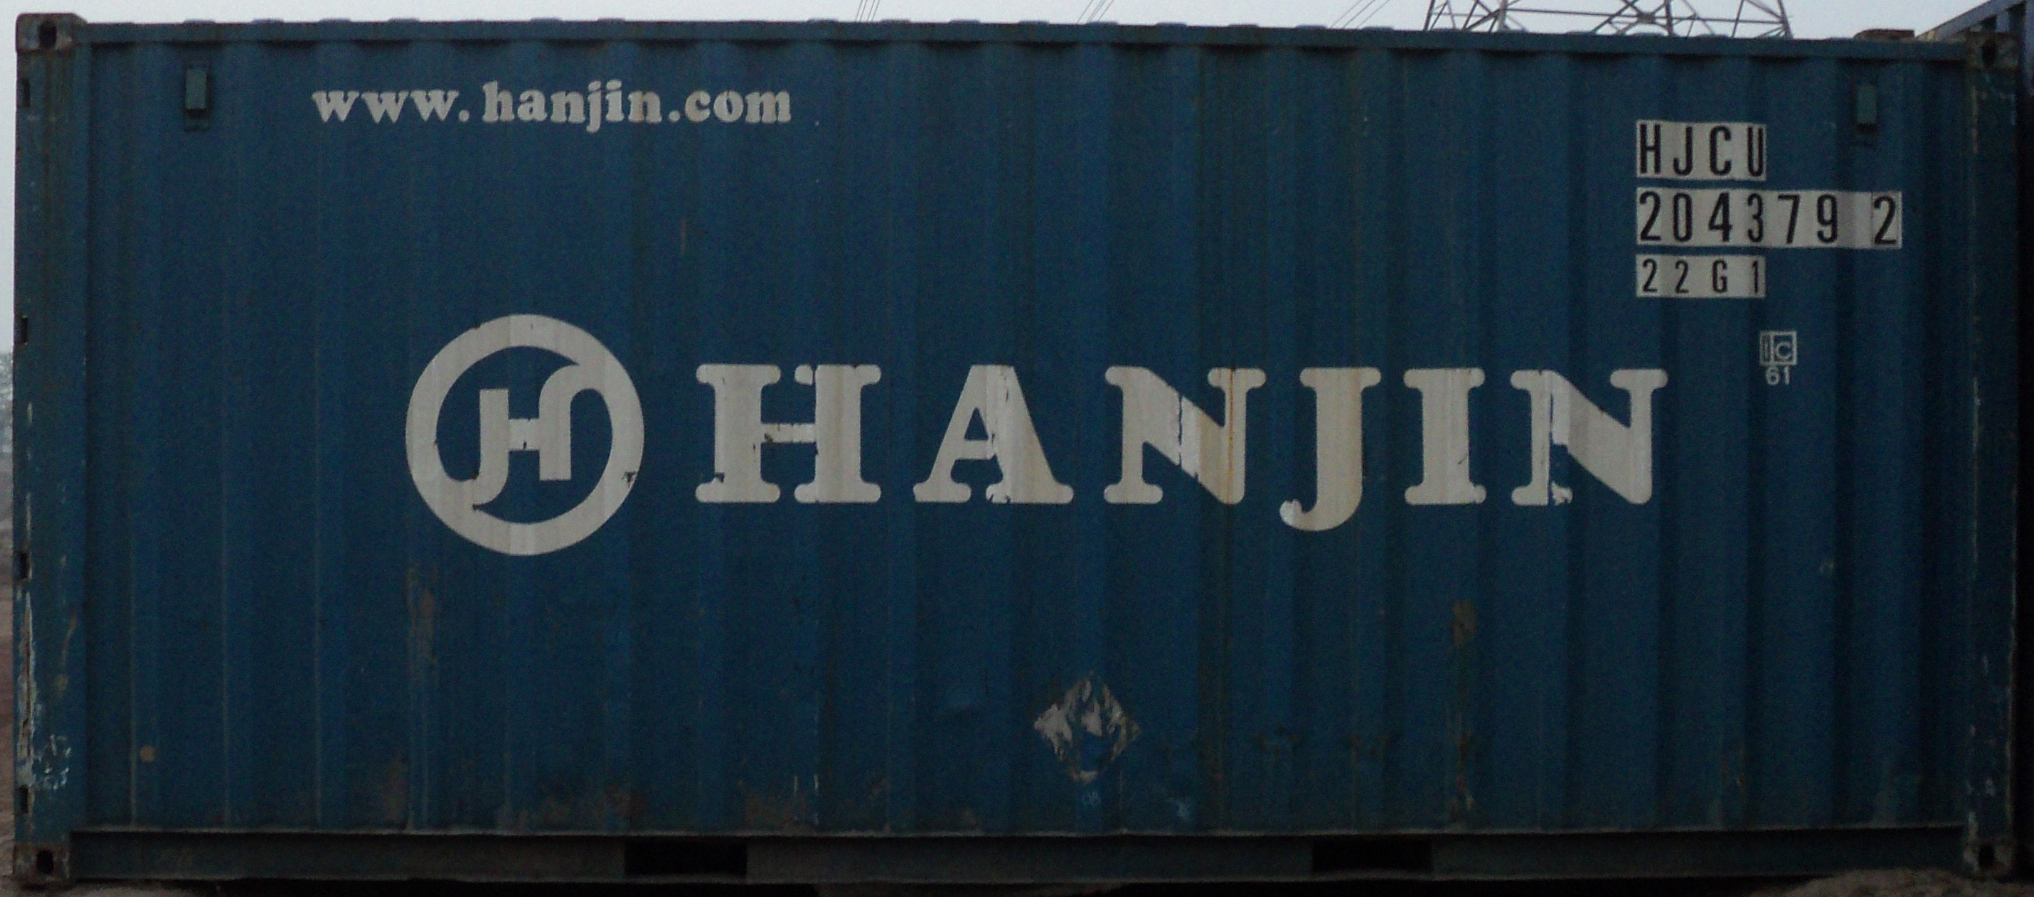 20DC HJCU container picture